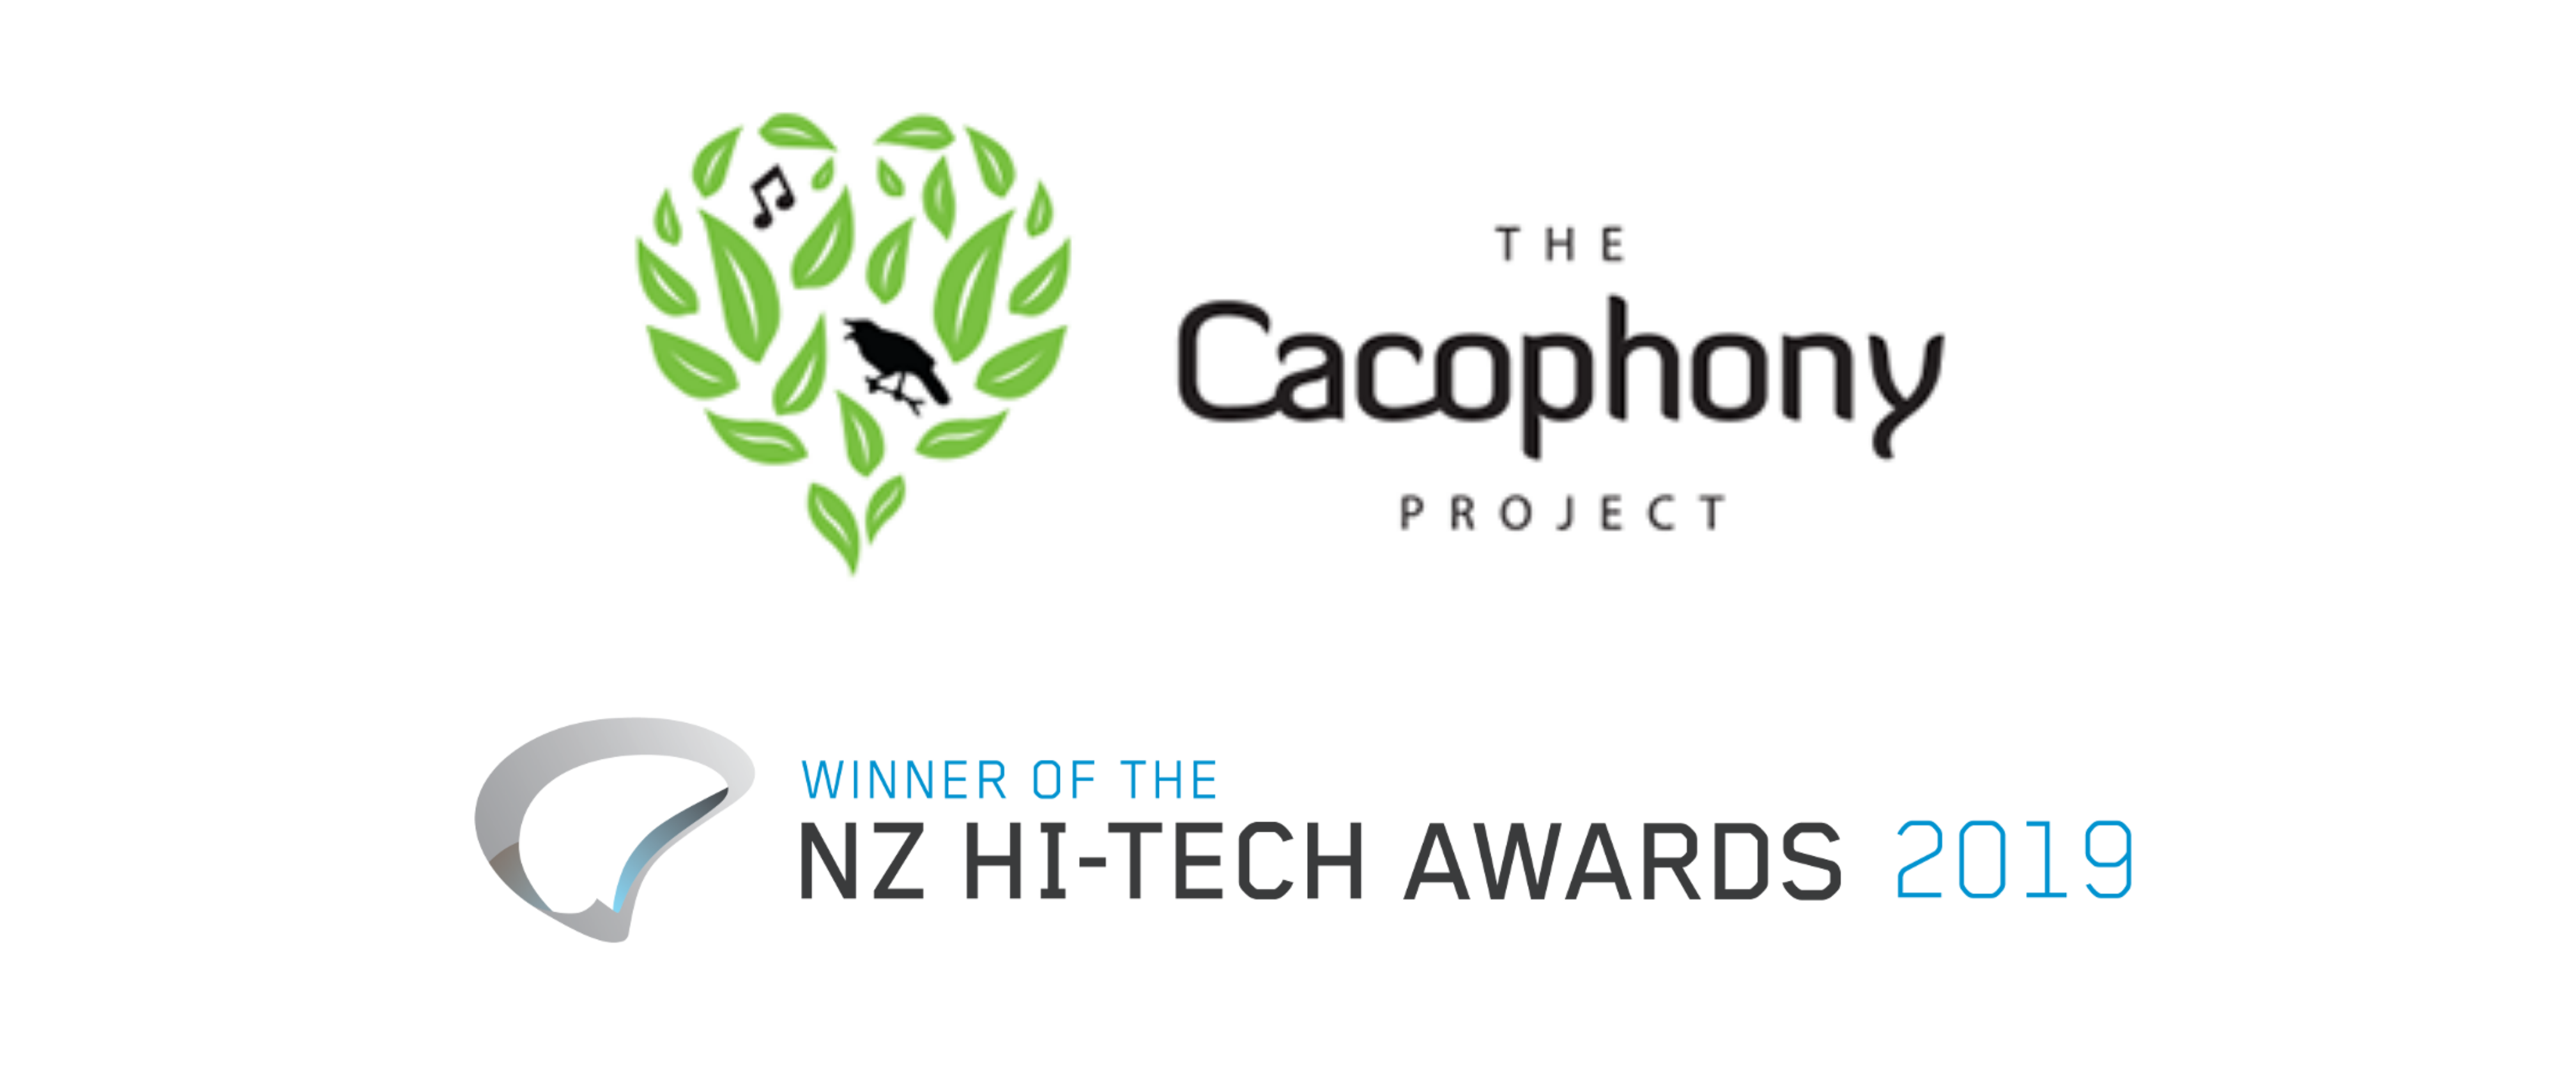 The Cacophony Project Wins 2019 New Zealand Hi-Tech Award-1